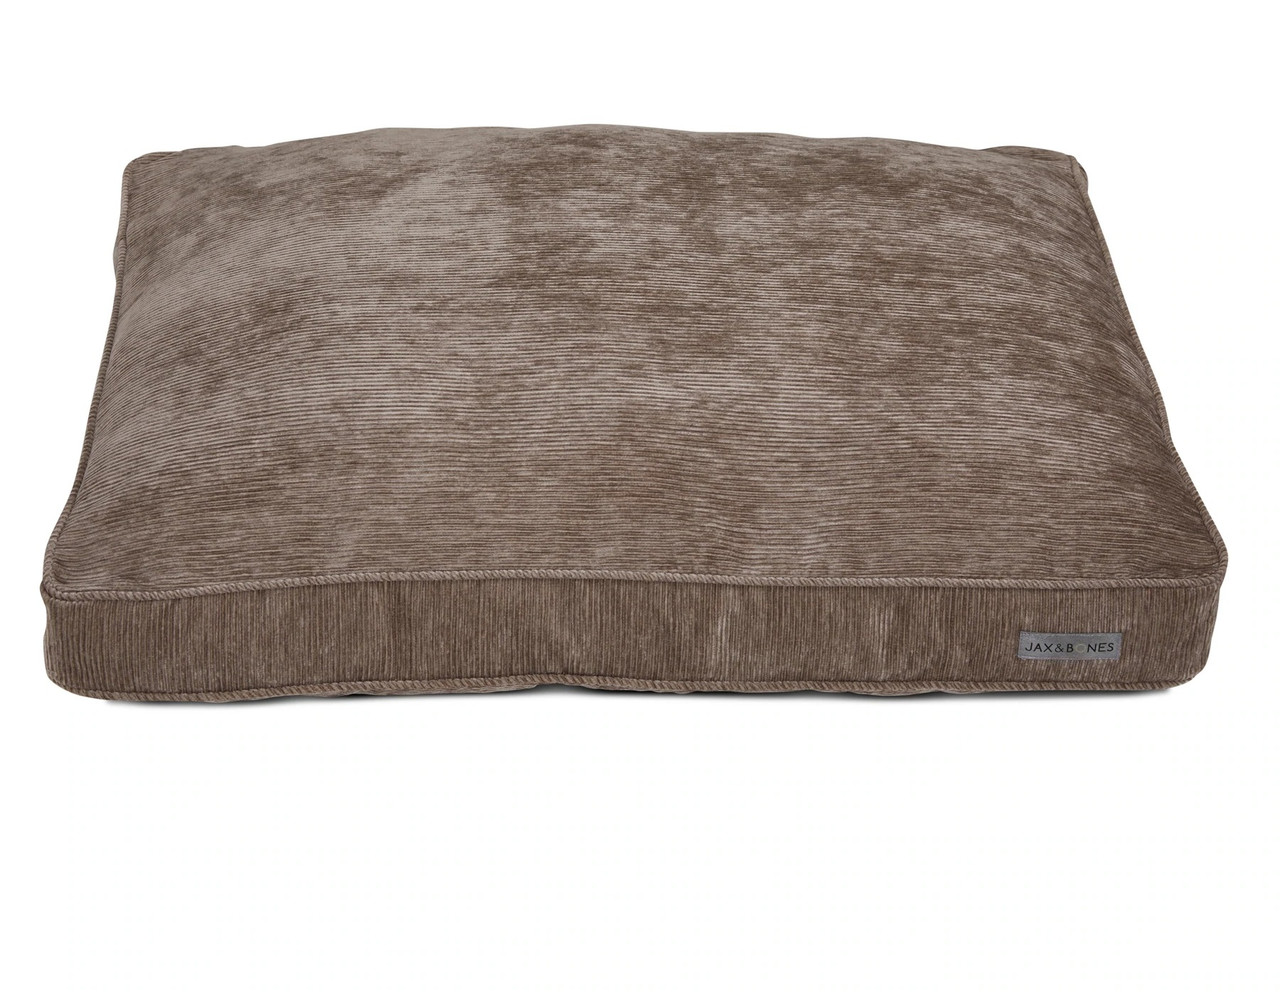 Corduroy Pillow Dog Bed